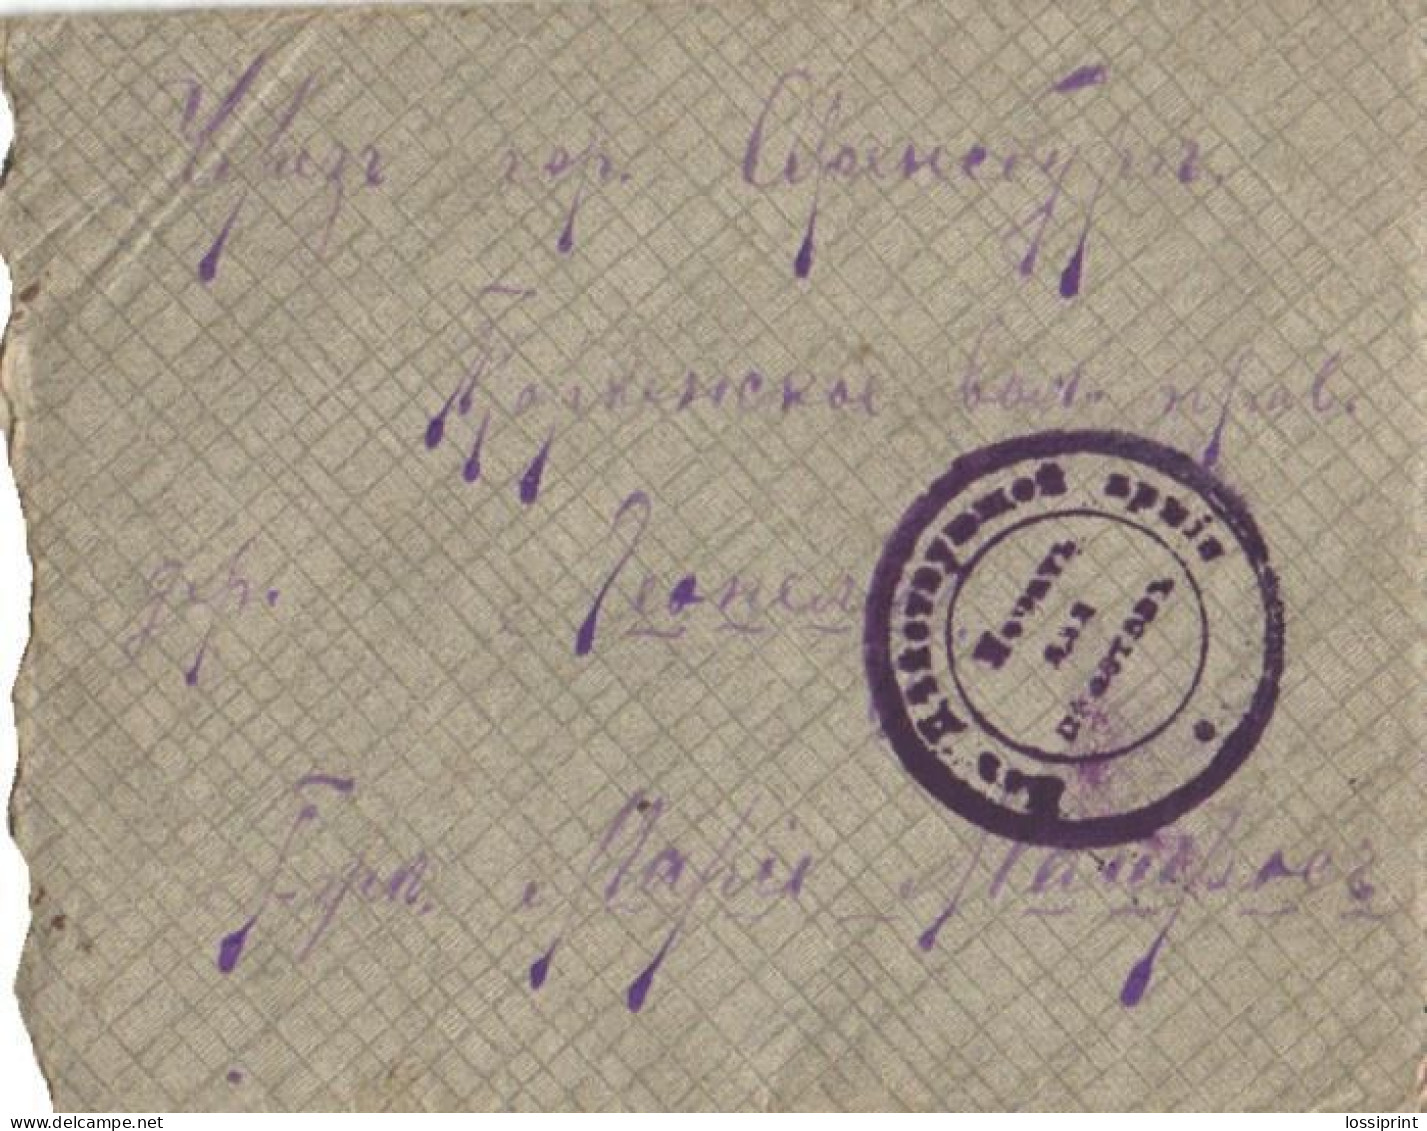 Russia:Estonia:Fieldpost From Active Army, Cancellation For Packages, 1916? - Briefe U. Dokumente